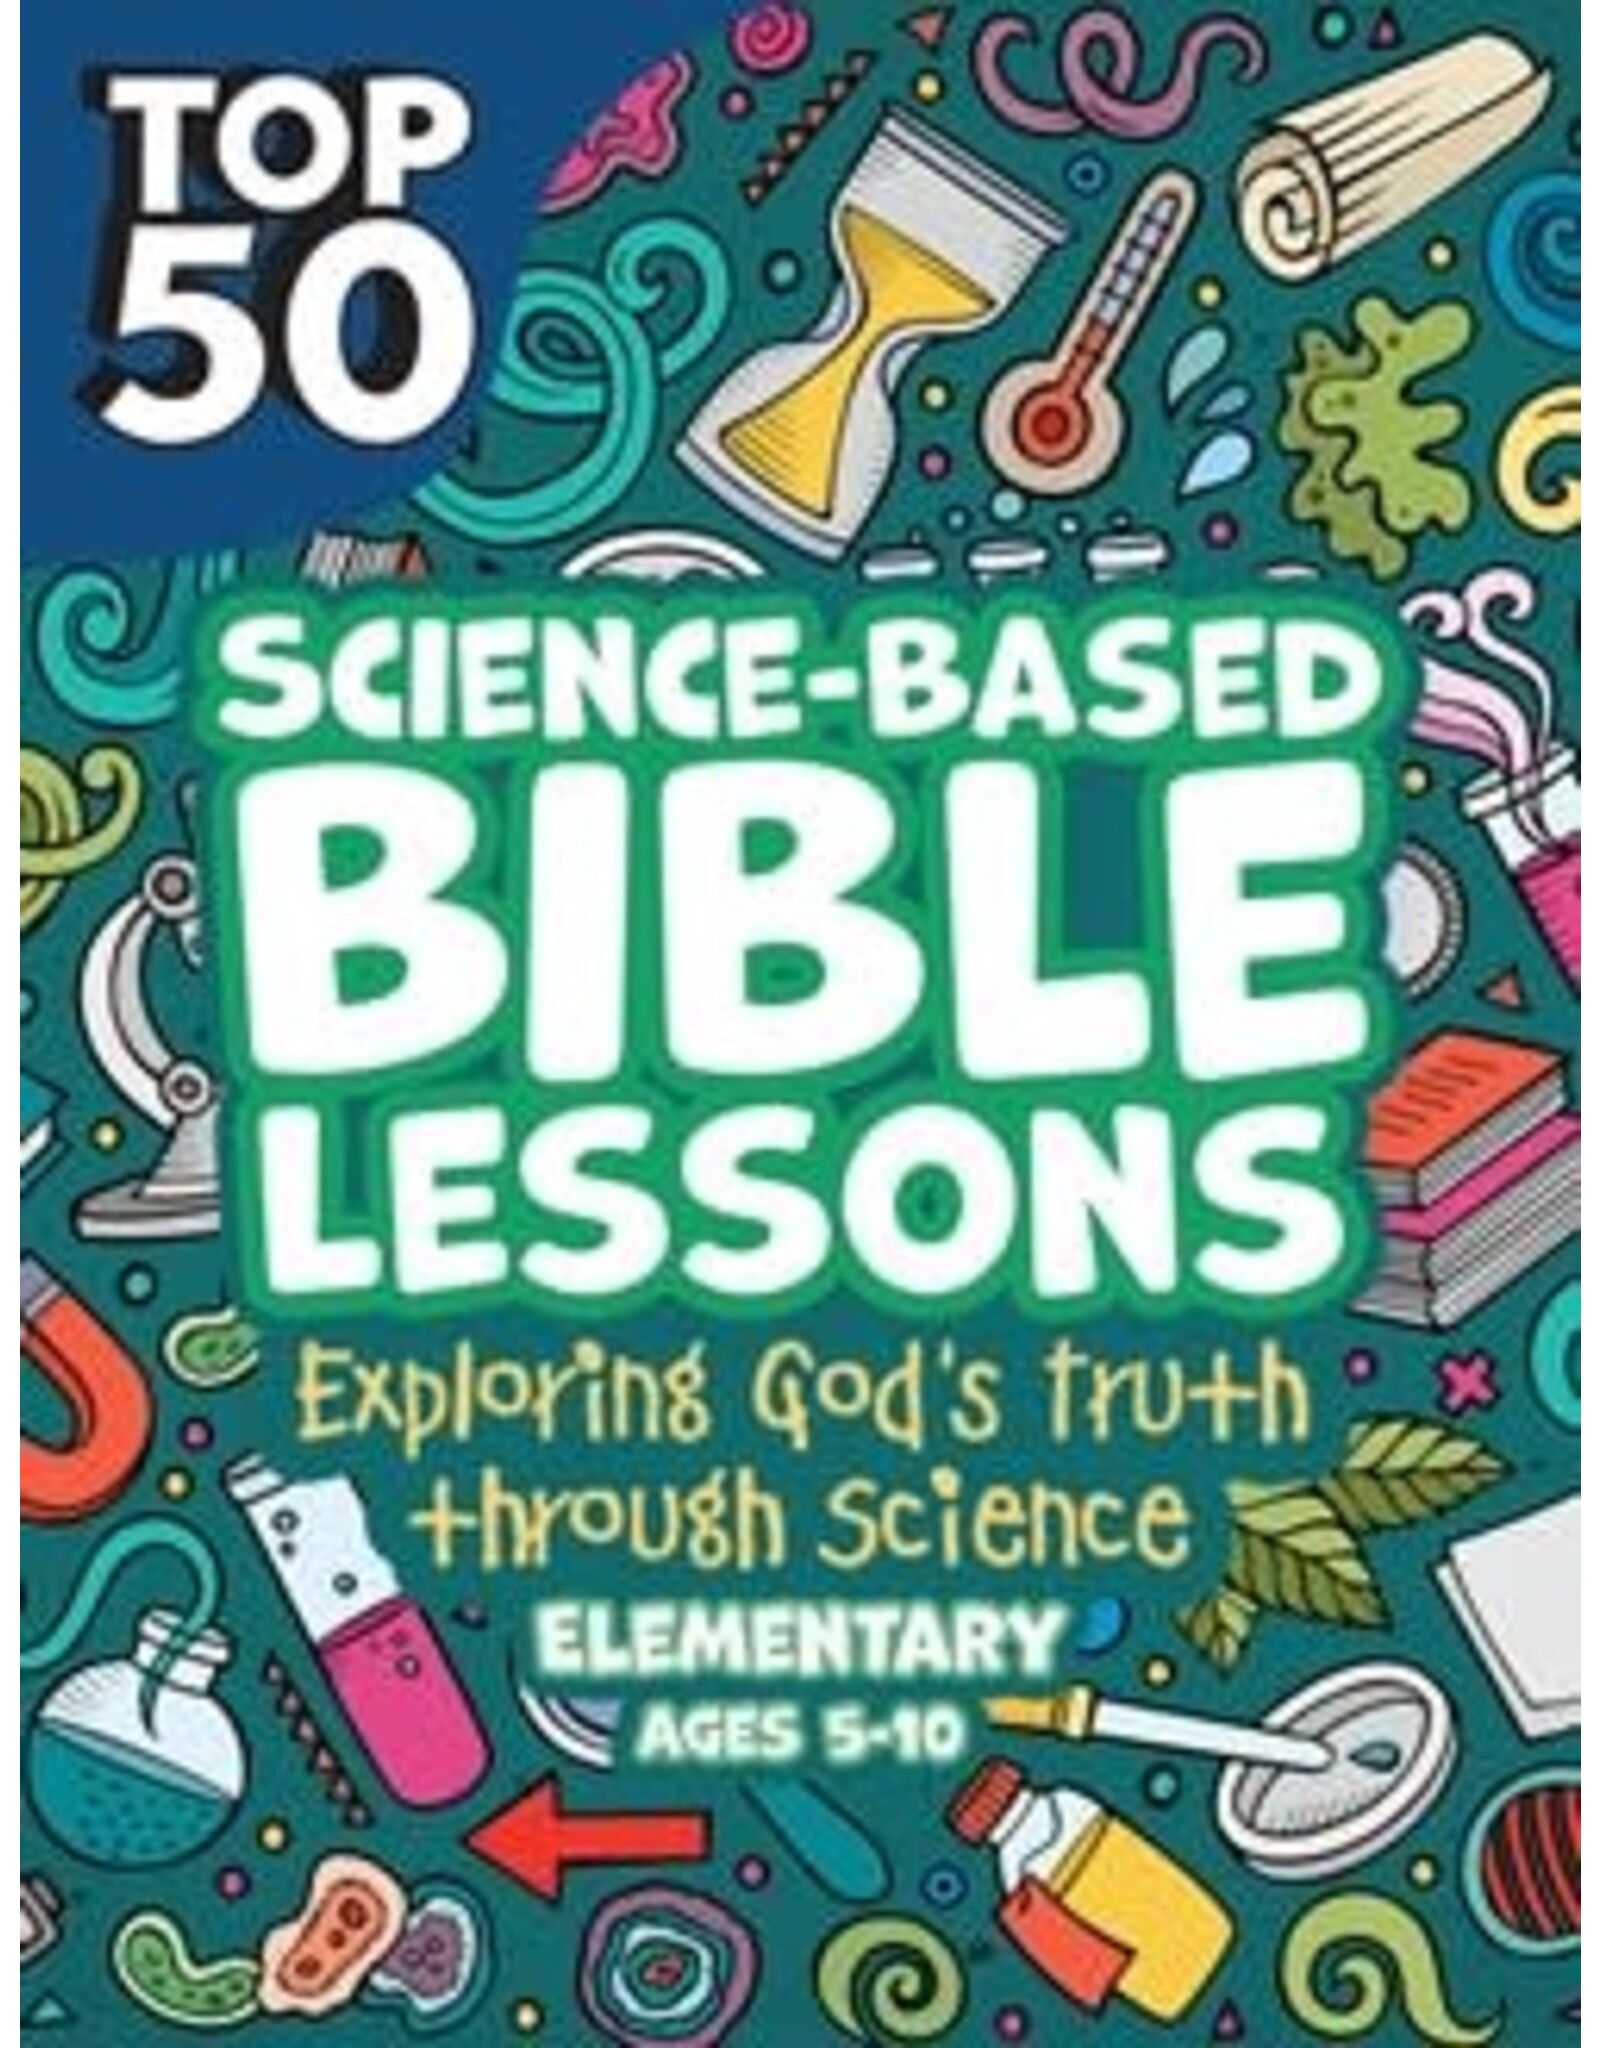 Top 50 Science Based Bible Lessons